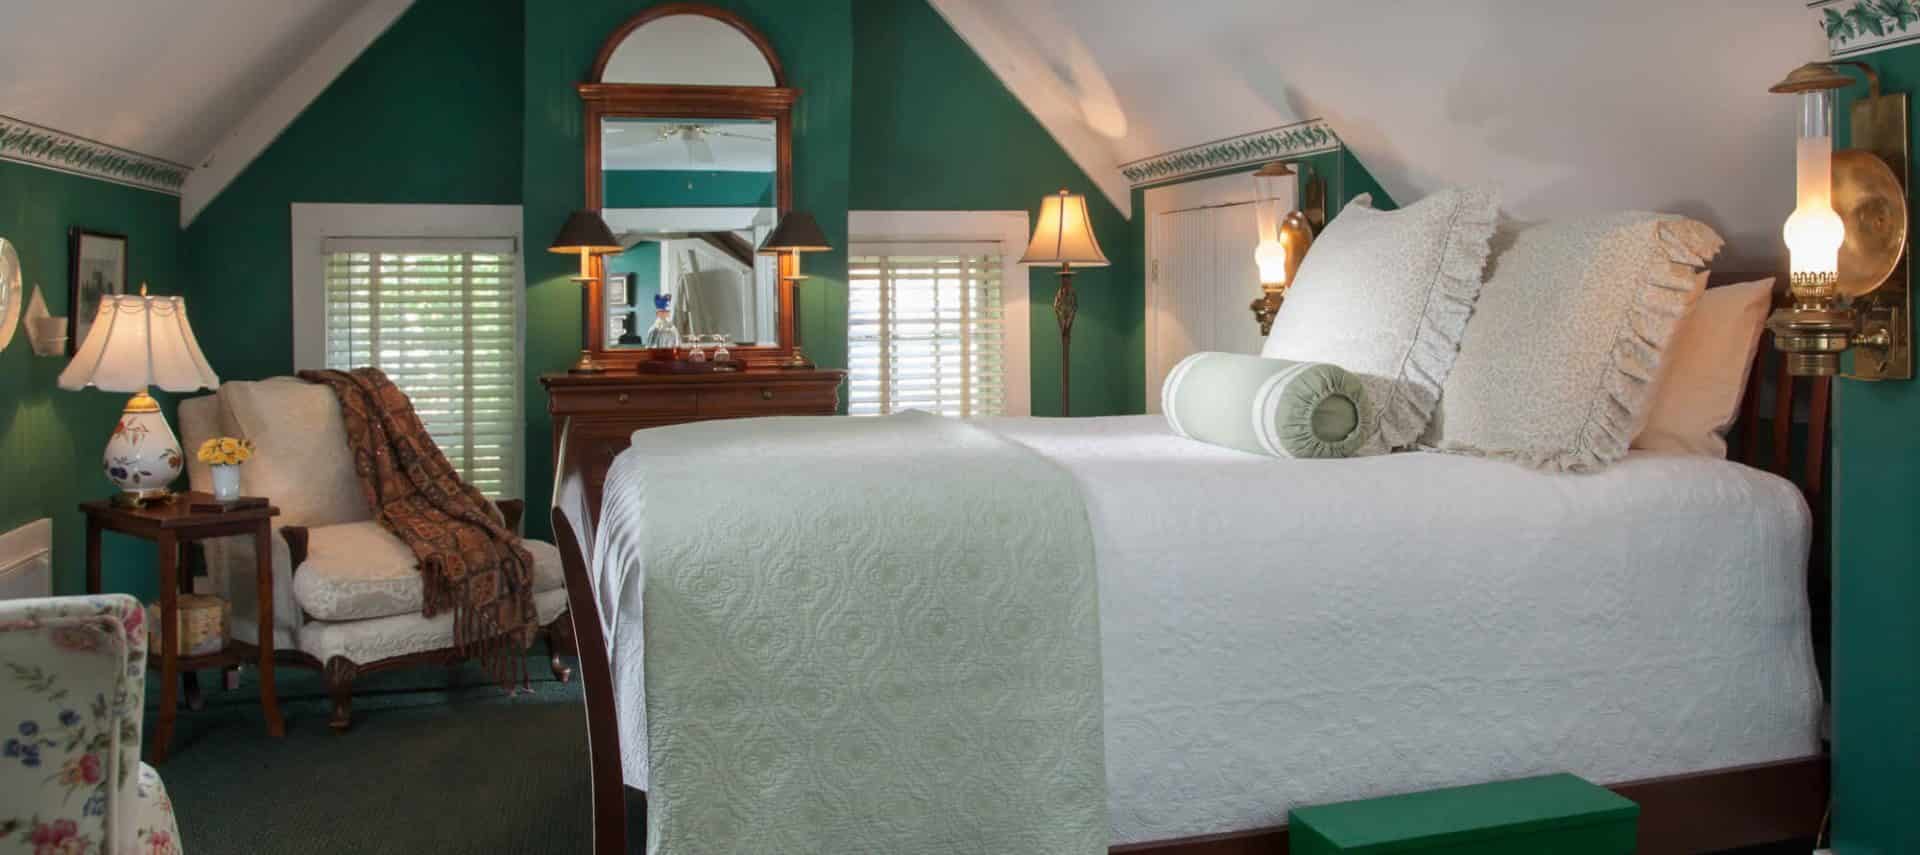 Large bedroom with hunter green walls and carpeting, dark wooden sleigh bed with white bedding, upholstered armchair, and wooden dresser